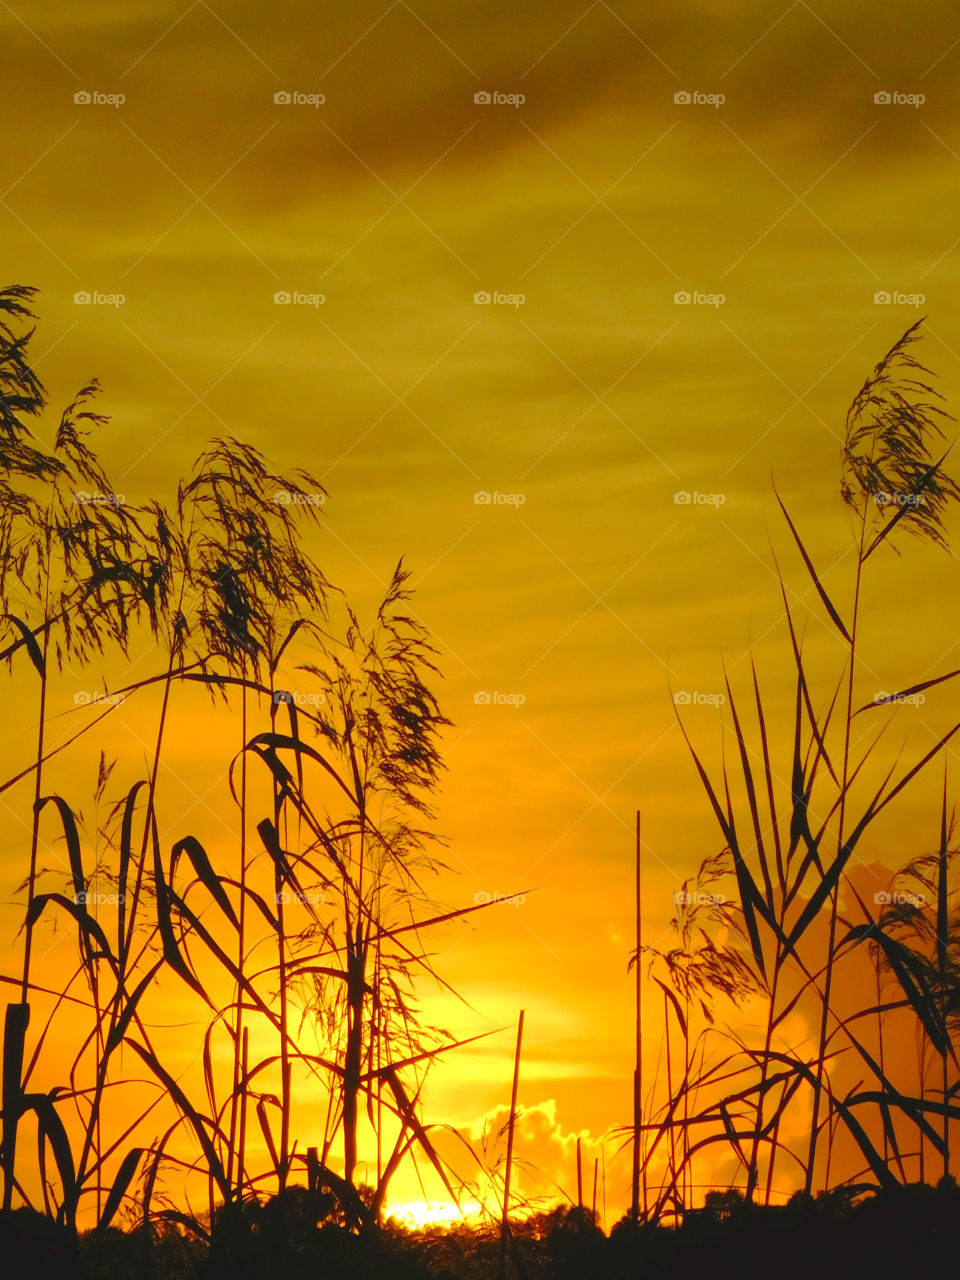 Sunset between the grasses!
A magnificent sunset peers among the tall grasses over the bay!